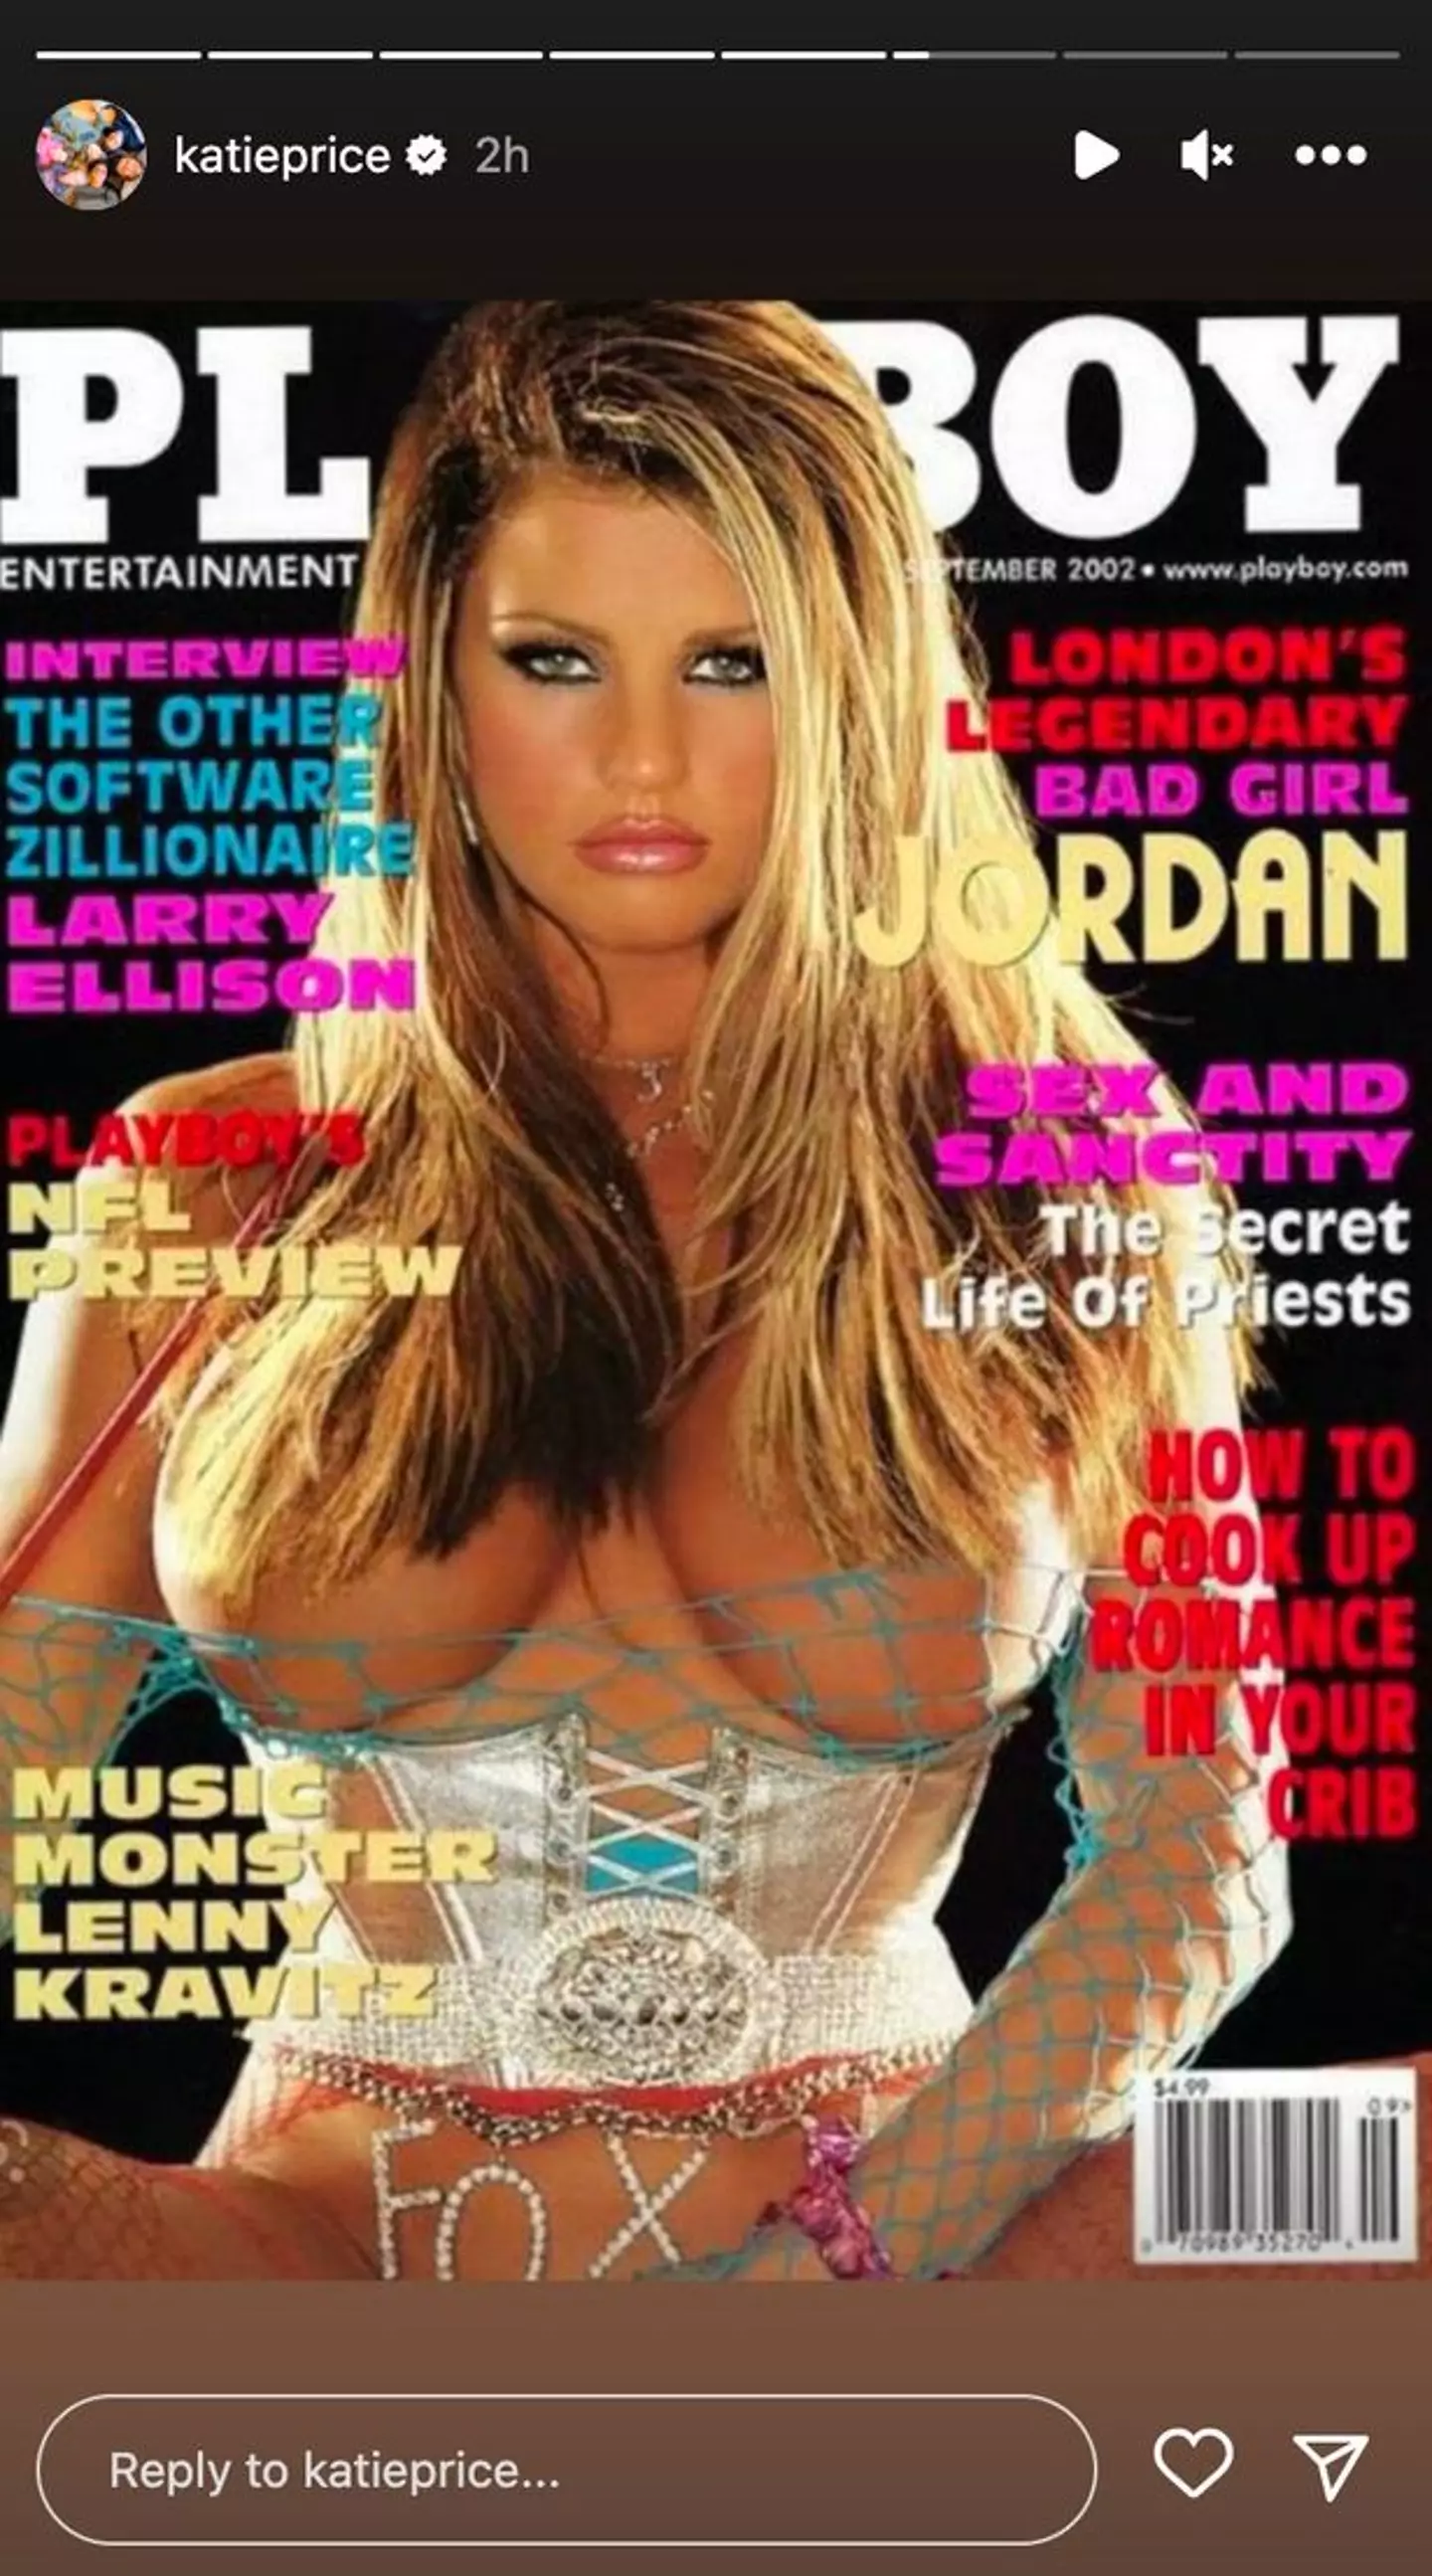 Katie Price on the cover of Playboy.